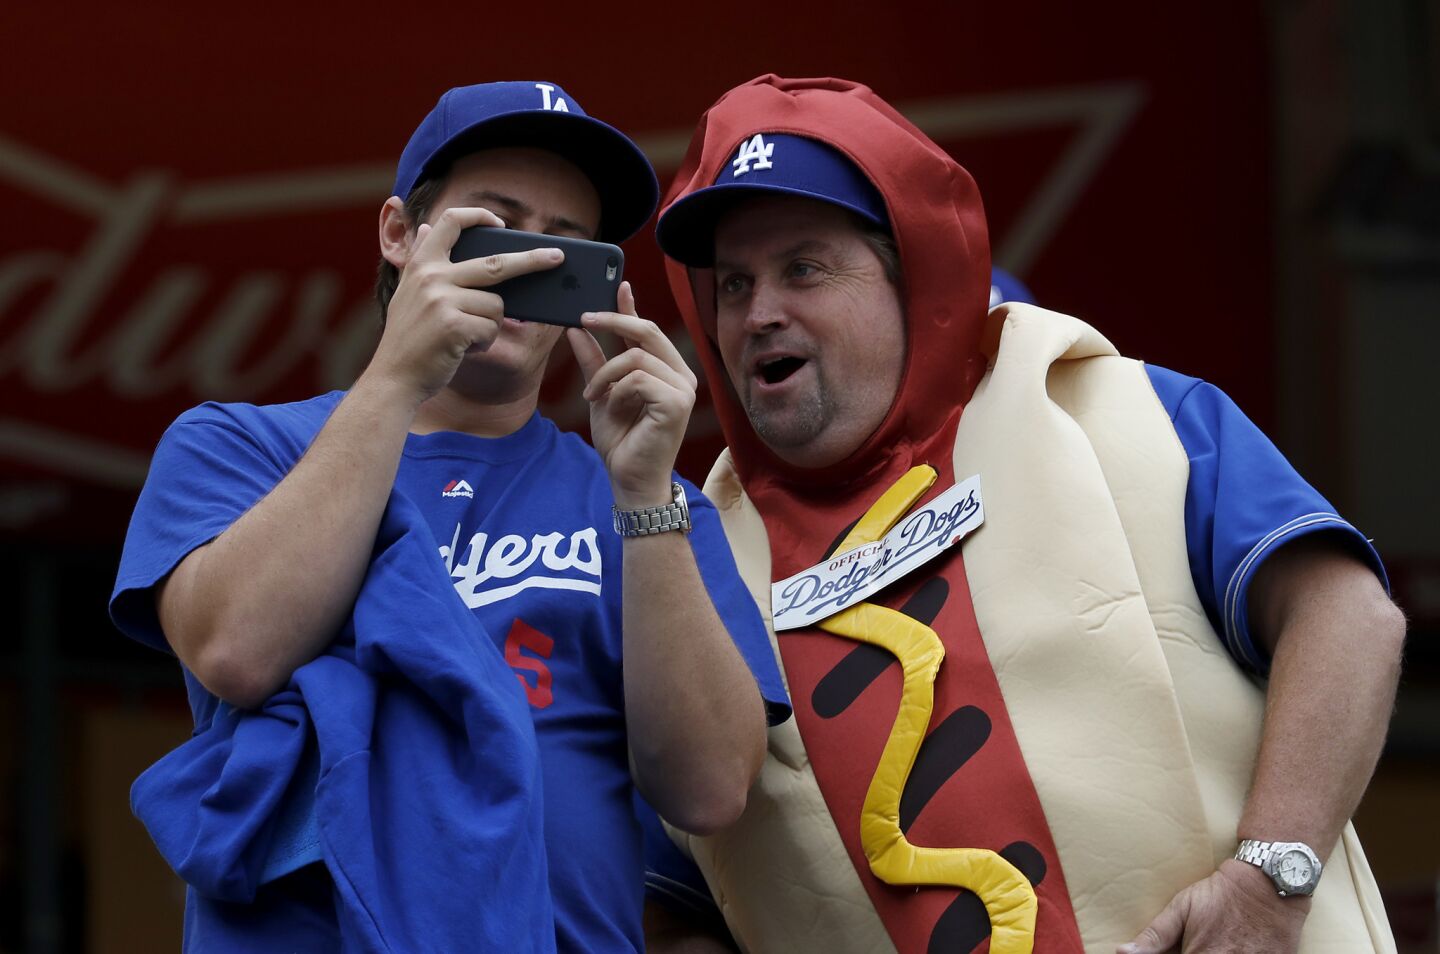 A fan dressed as a Dodger dog before Game 6 of the World Series at Dodger Stadium.